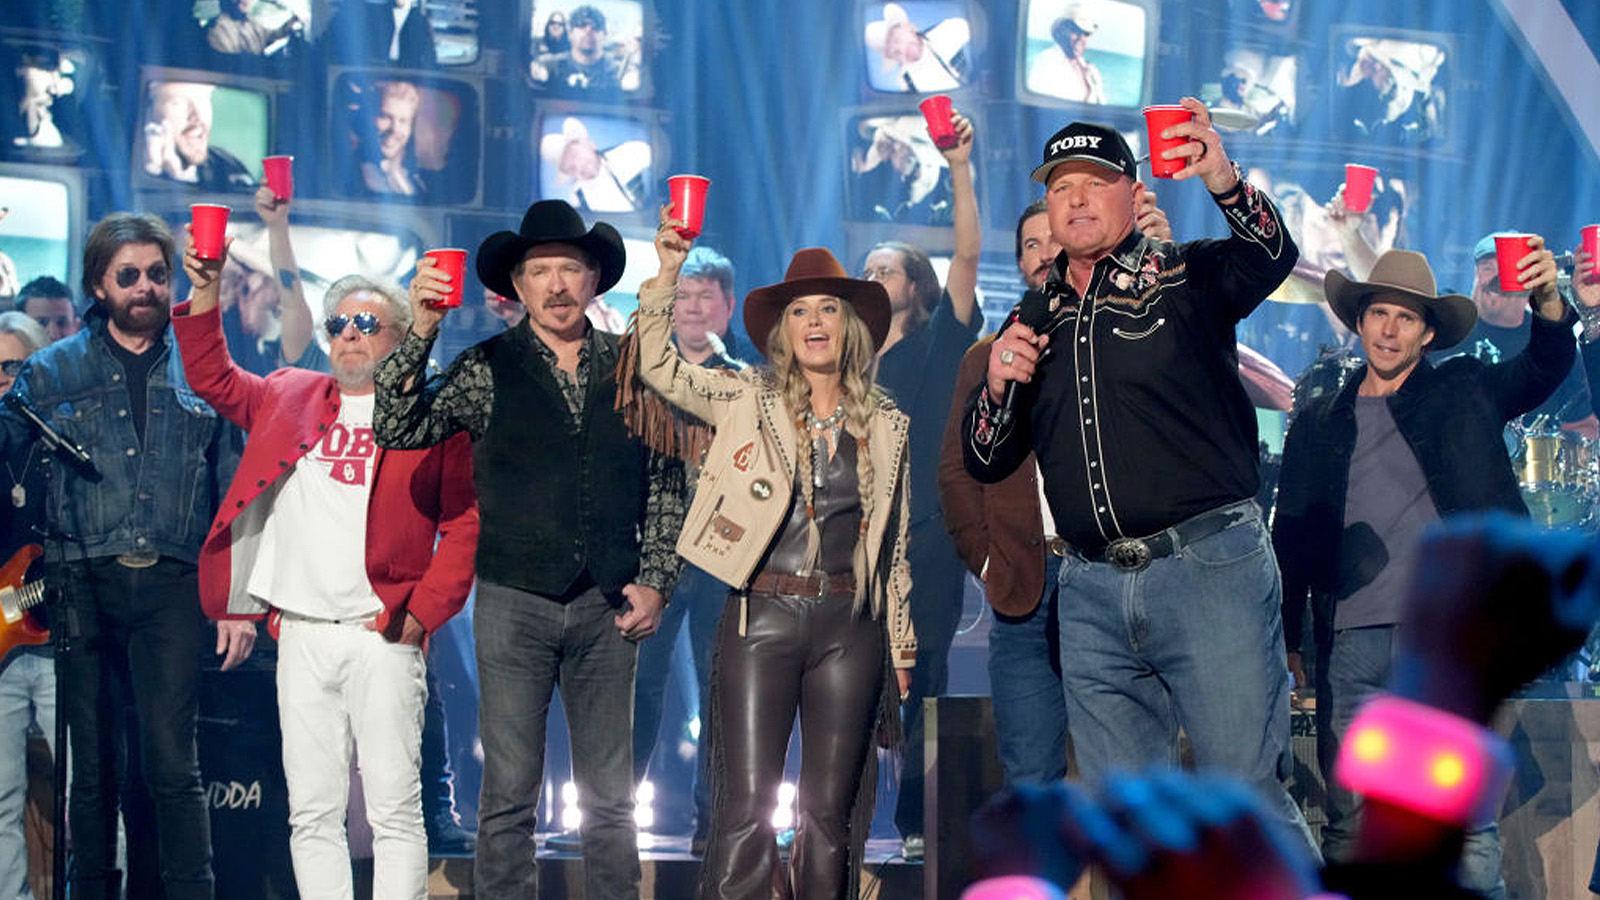 Toby Keith Refused To Honor Texas After Bet With Roger Clemens [Video]